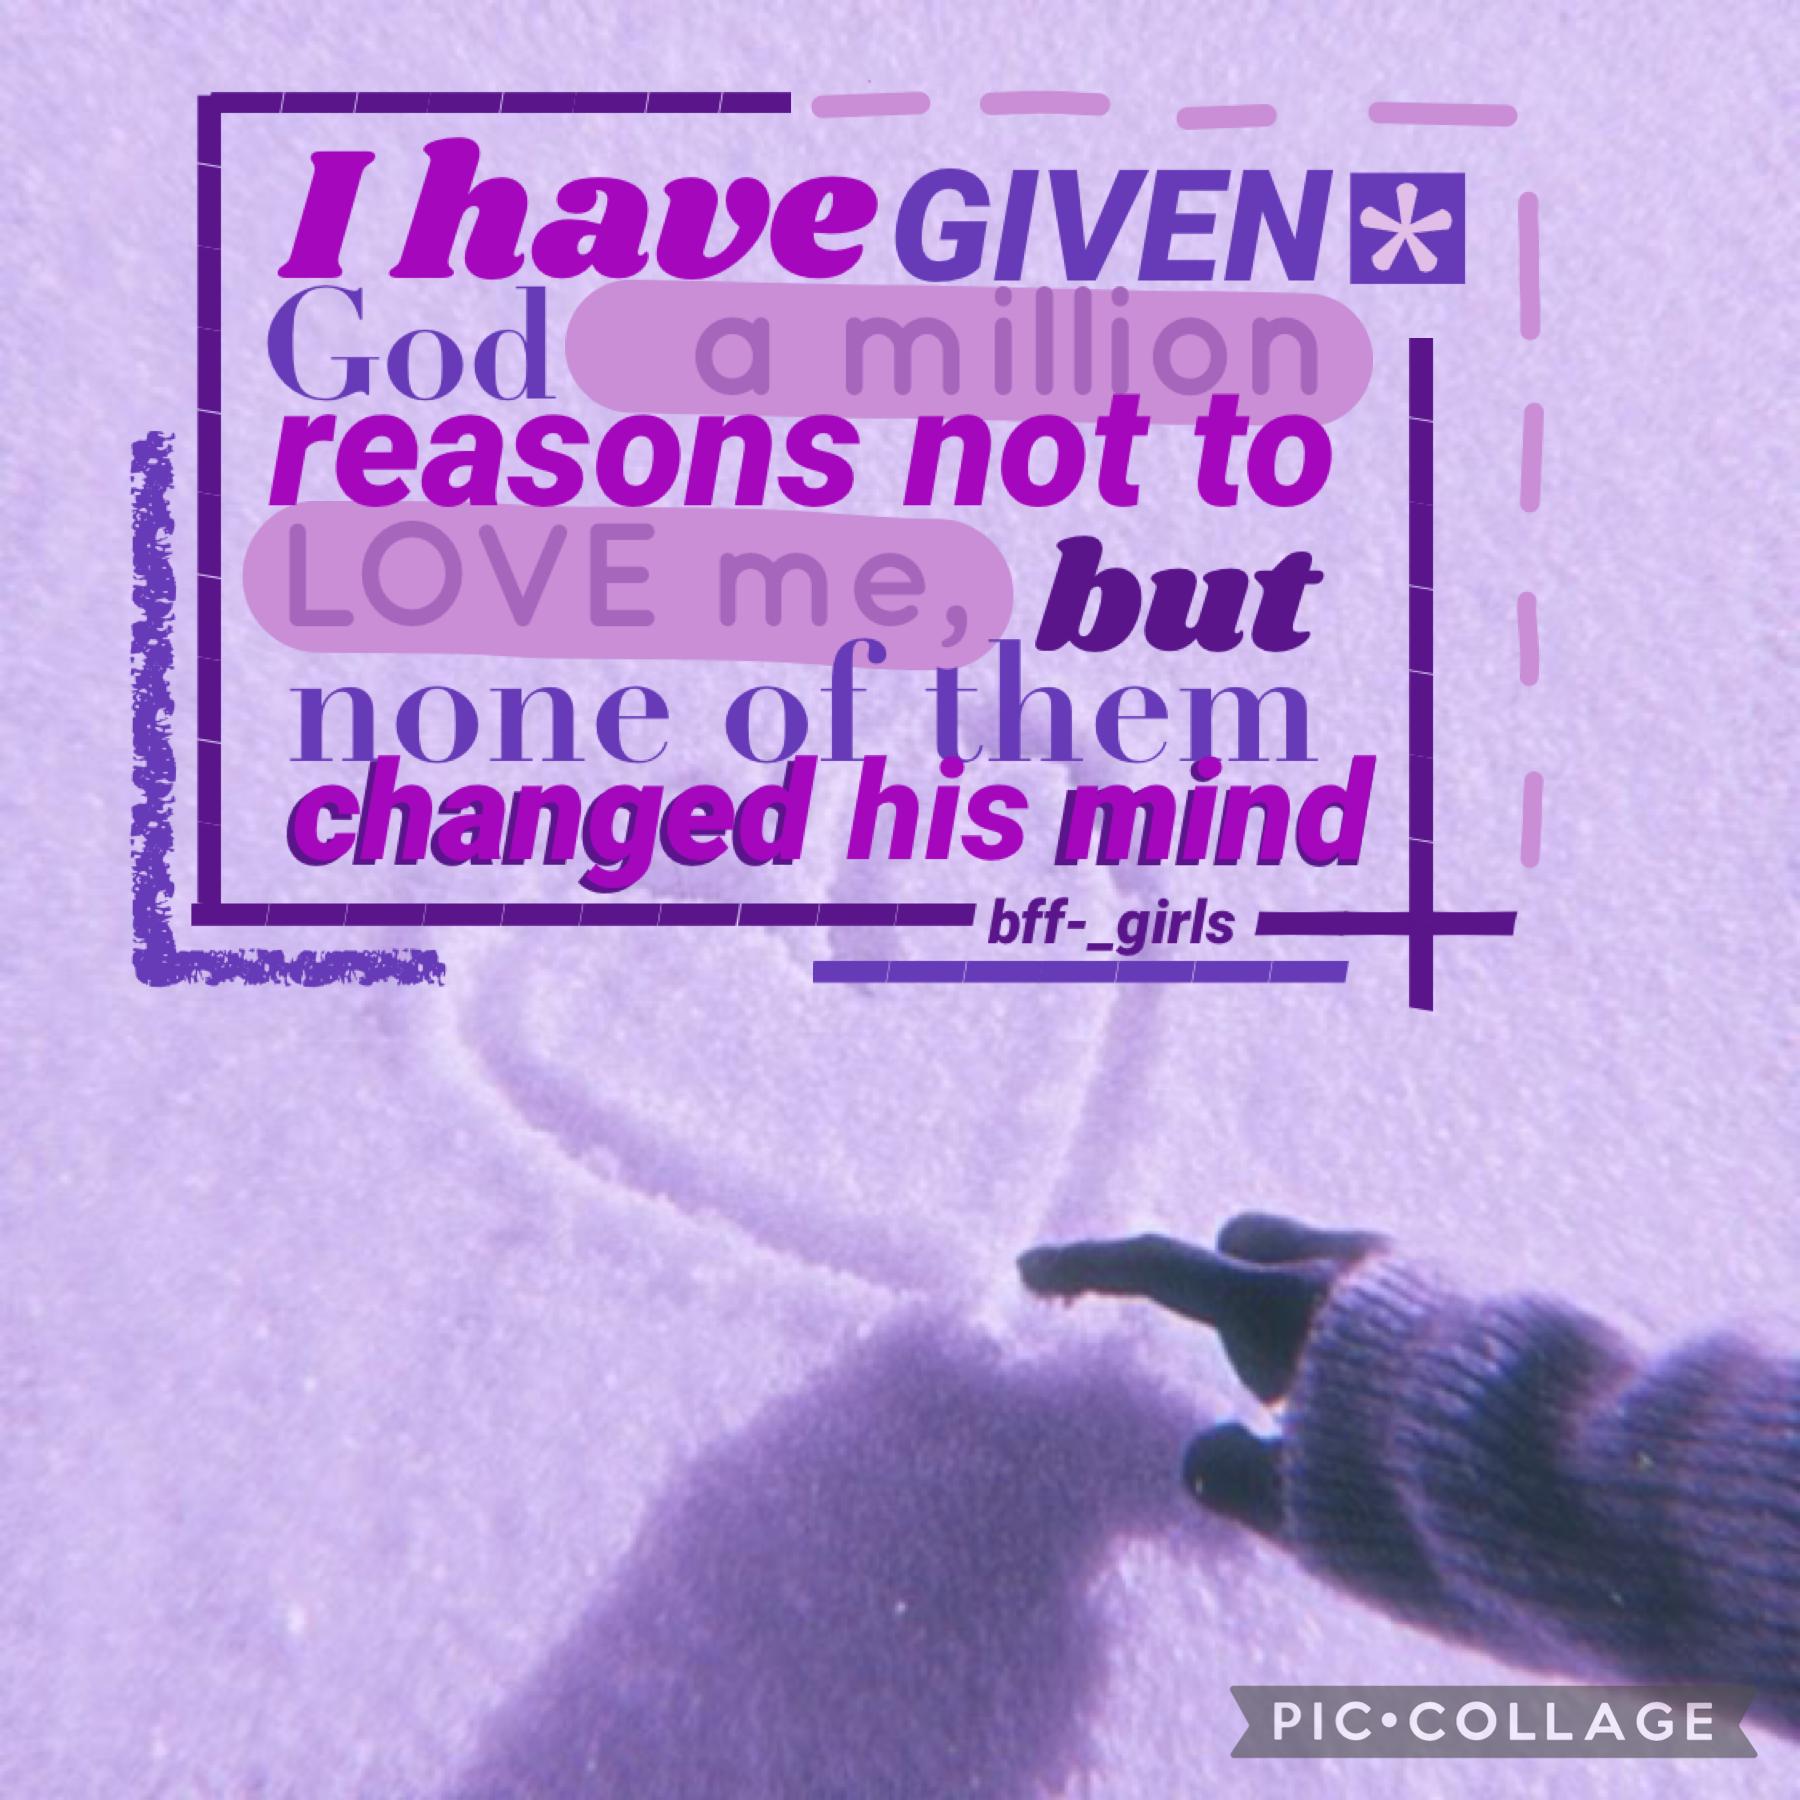 Hello lovely people of piccollage! I want to encourage you today with a verse from Romans in the bible (it’s my favourite verse in the bible) Roman’s 8:38-39 “And I am convinced that nothing can ever separate us from God’s love. Neither death nor life, ne